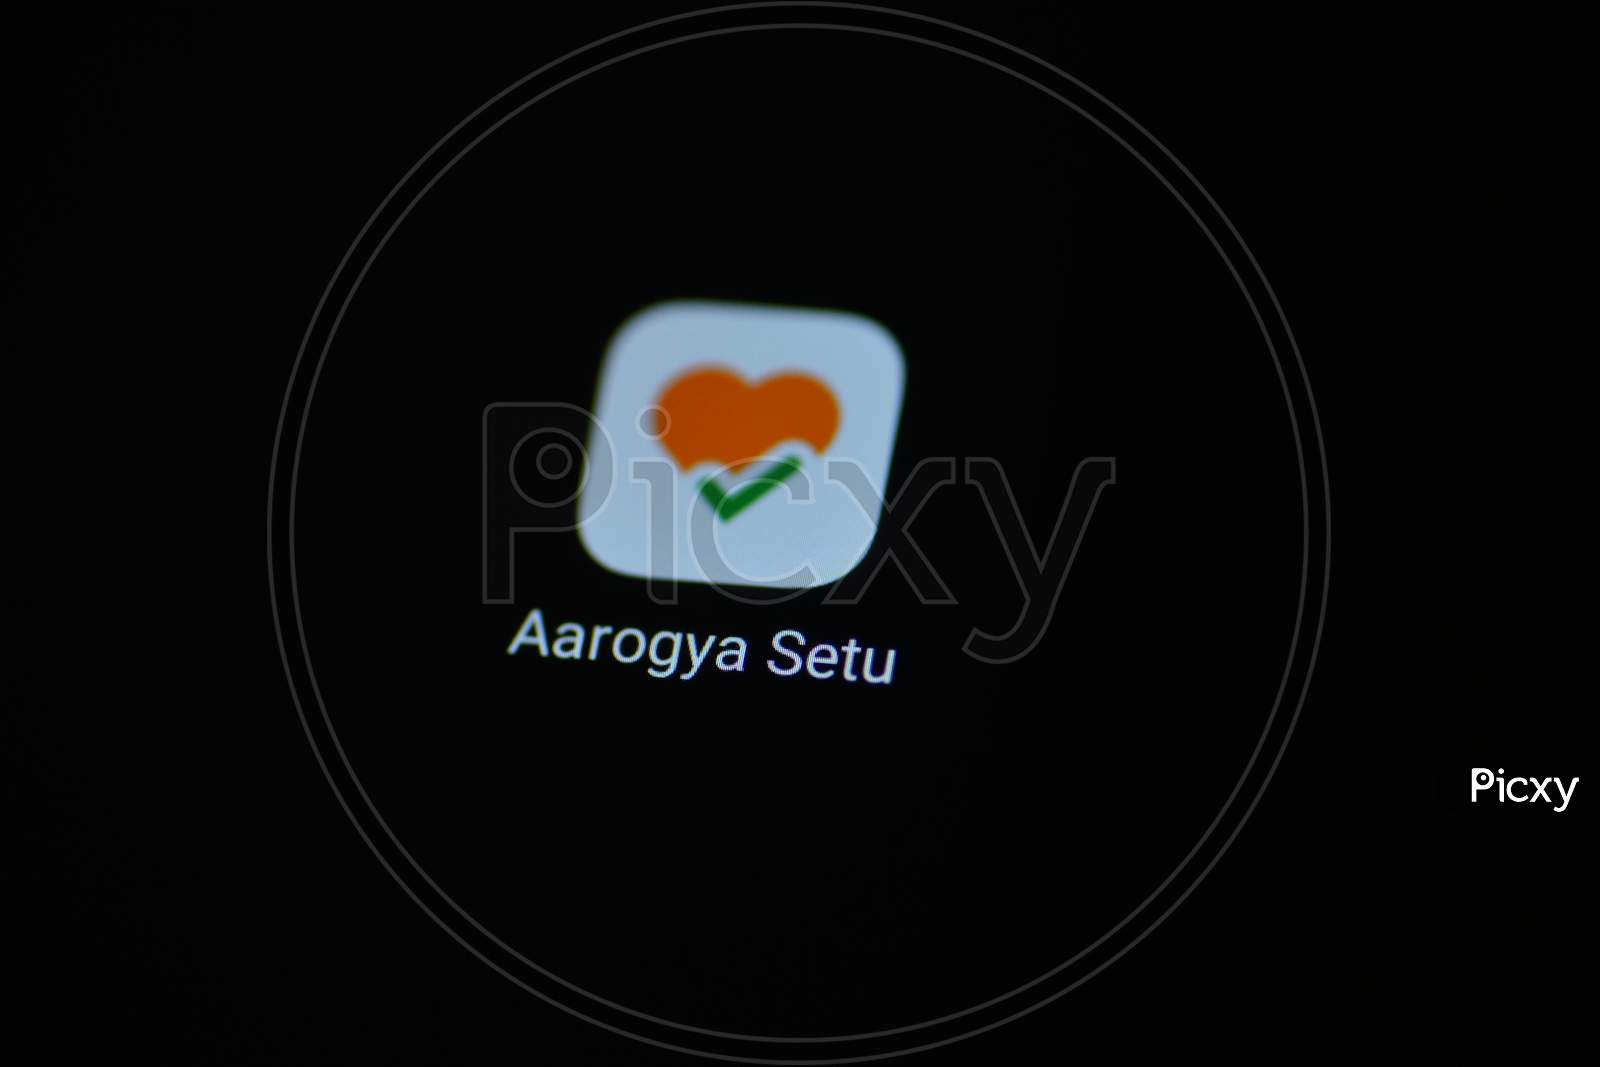 Arogya setu, a Mobile application developed by Govt of India to connect Essential health services with people of India amid coronavirus pandemic